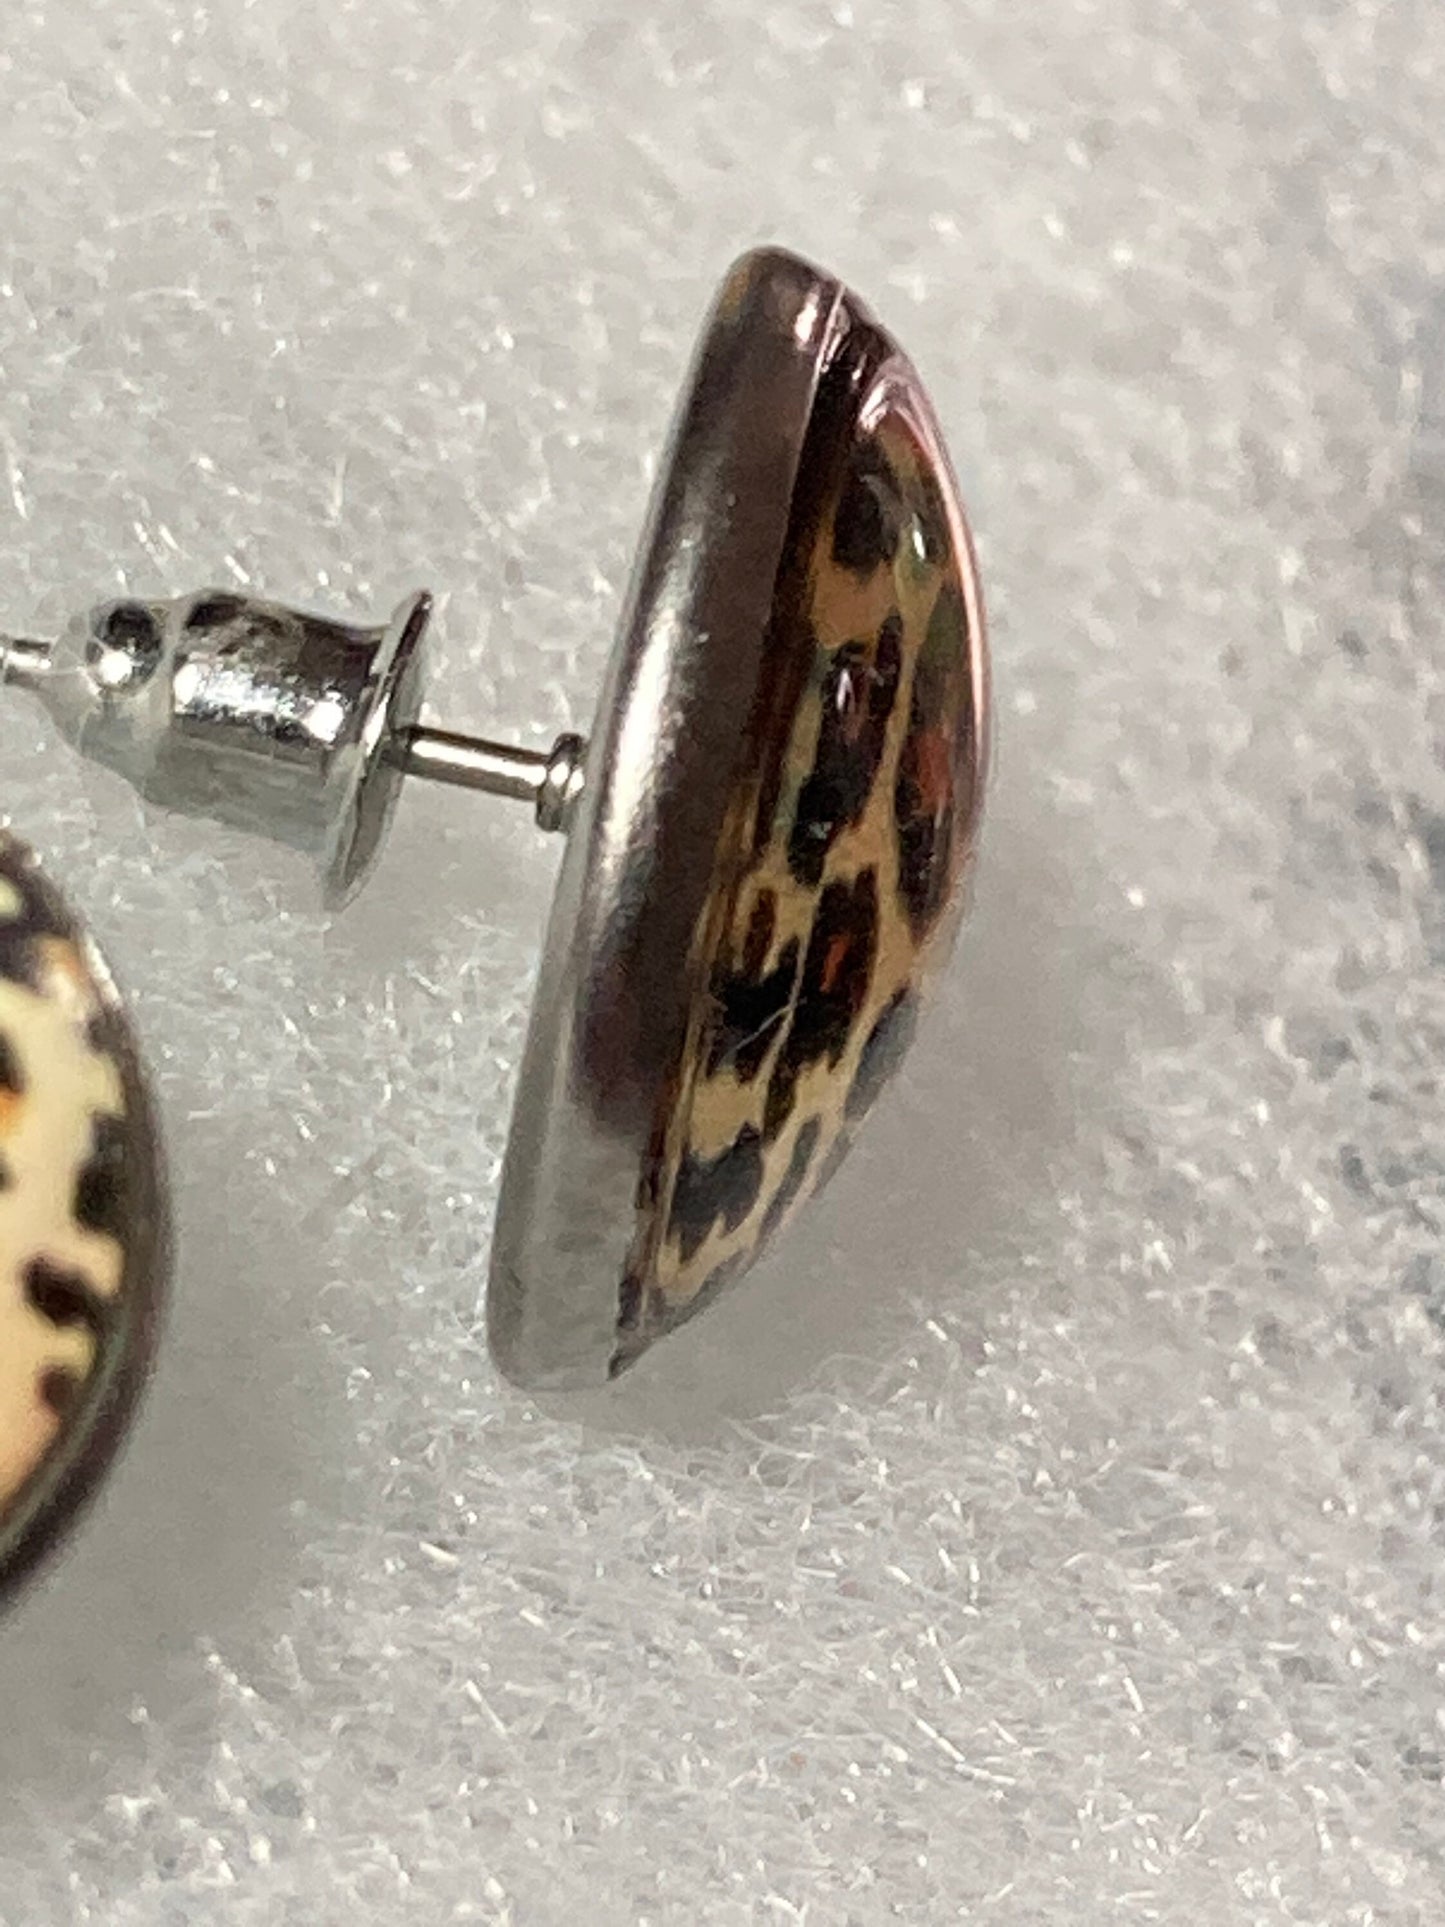 leopard print round silver stud earrings stainless steel with glass cabochons